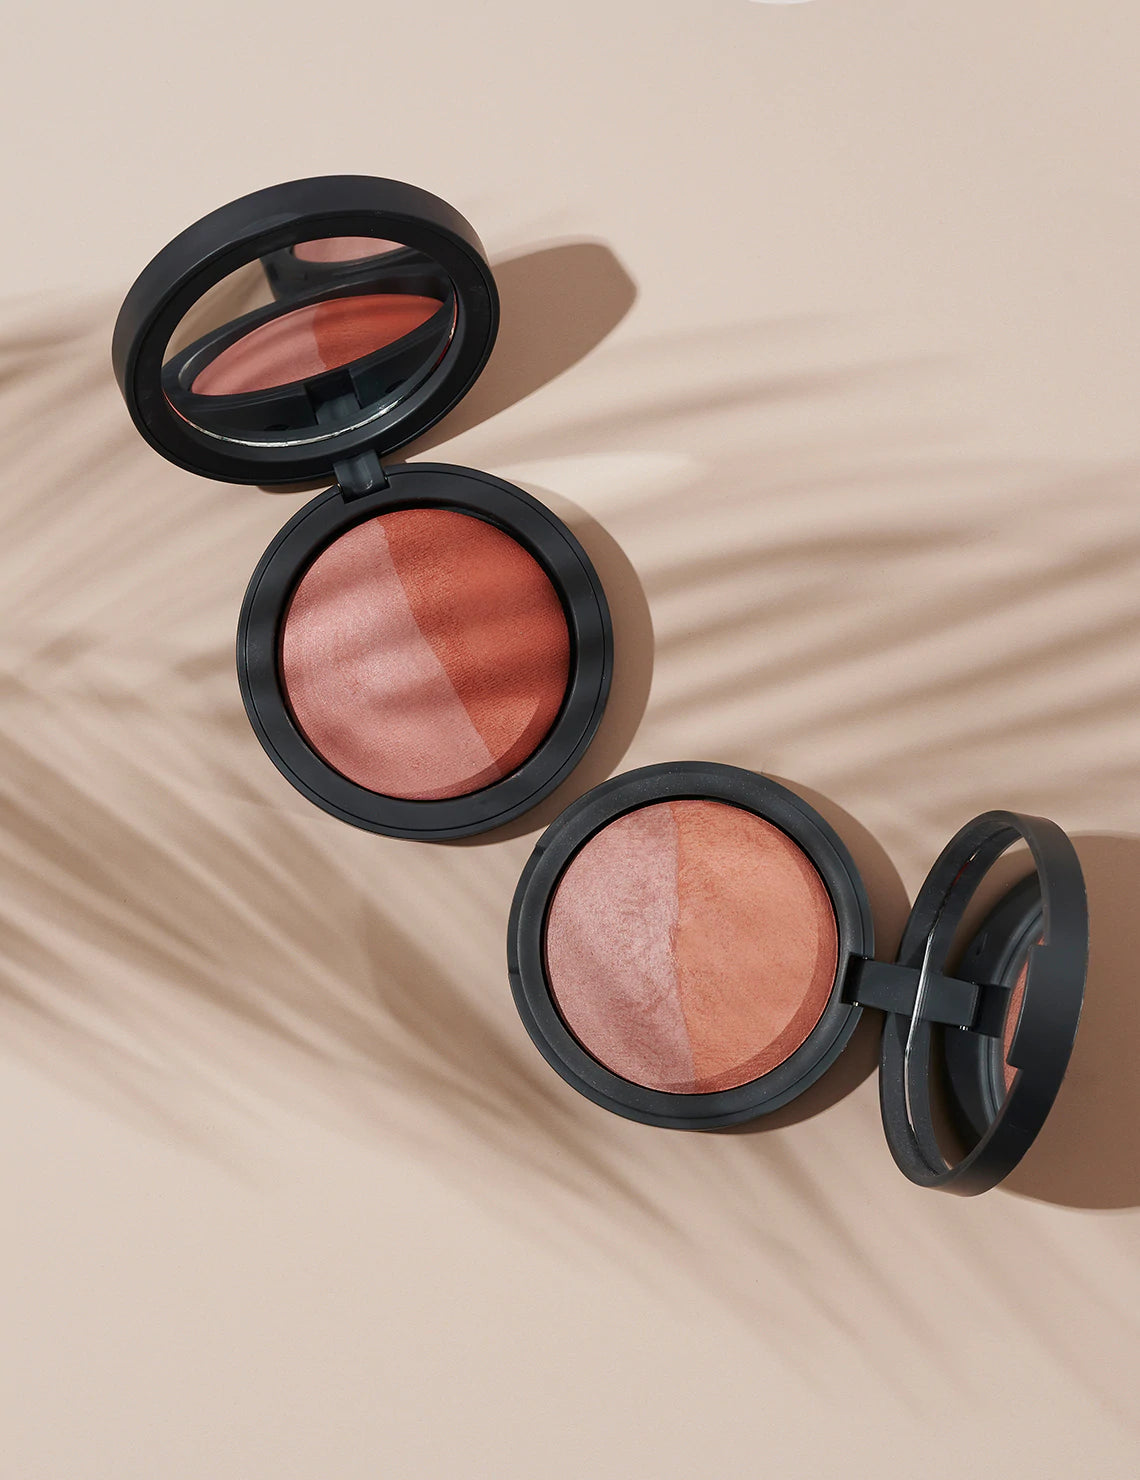 Baked Blush Duo - Pink Tickle Duo